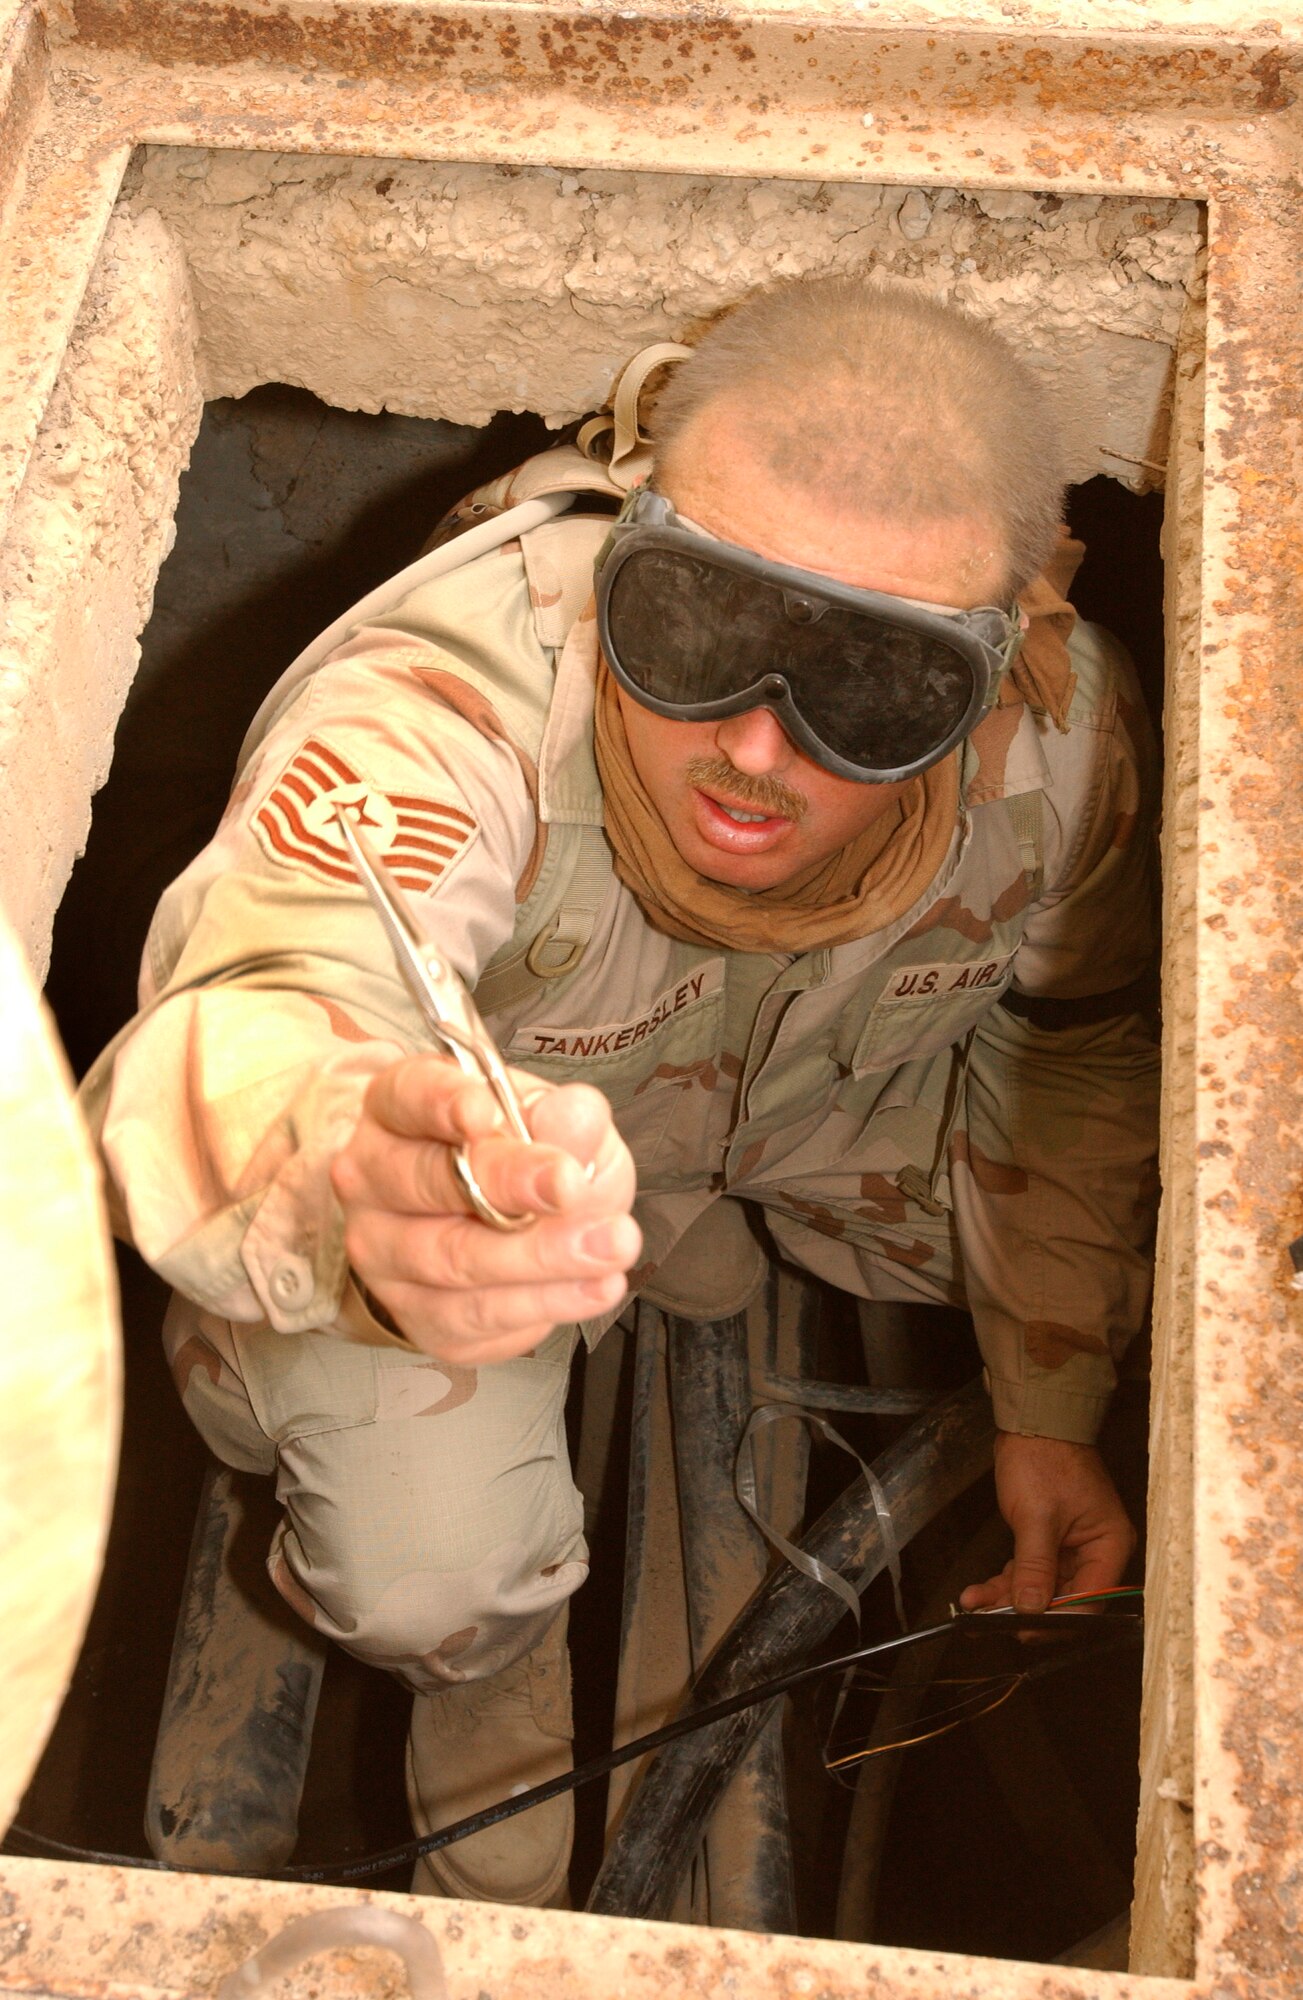 OPERATION IRAQI FREEDOM (AFPN) -- Tech. Sgt. Denny Tankersley prepares to splice fiber-optic cable at Tallil Air Base in southern Iraq. Tankersley is assigned to the 5th Combat Communications Group from Robins Air Force Base, Ga. (U.S. Air Force photo by Master Sgt. Terry L. Blevins.)